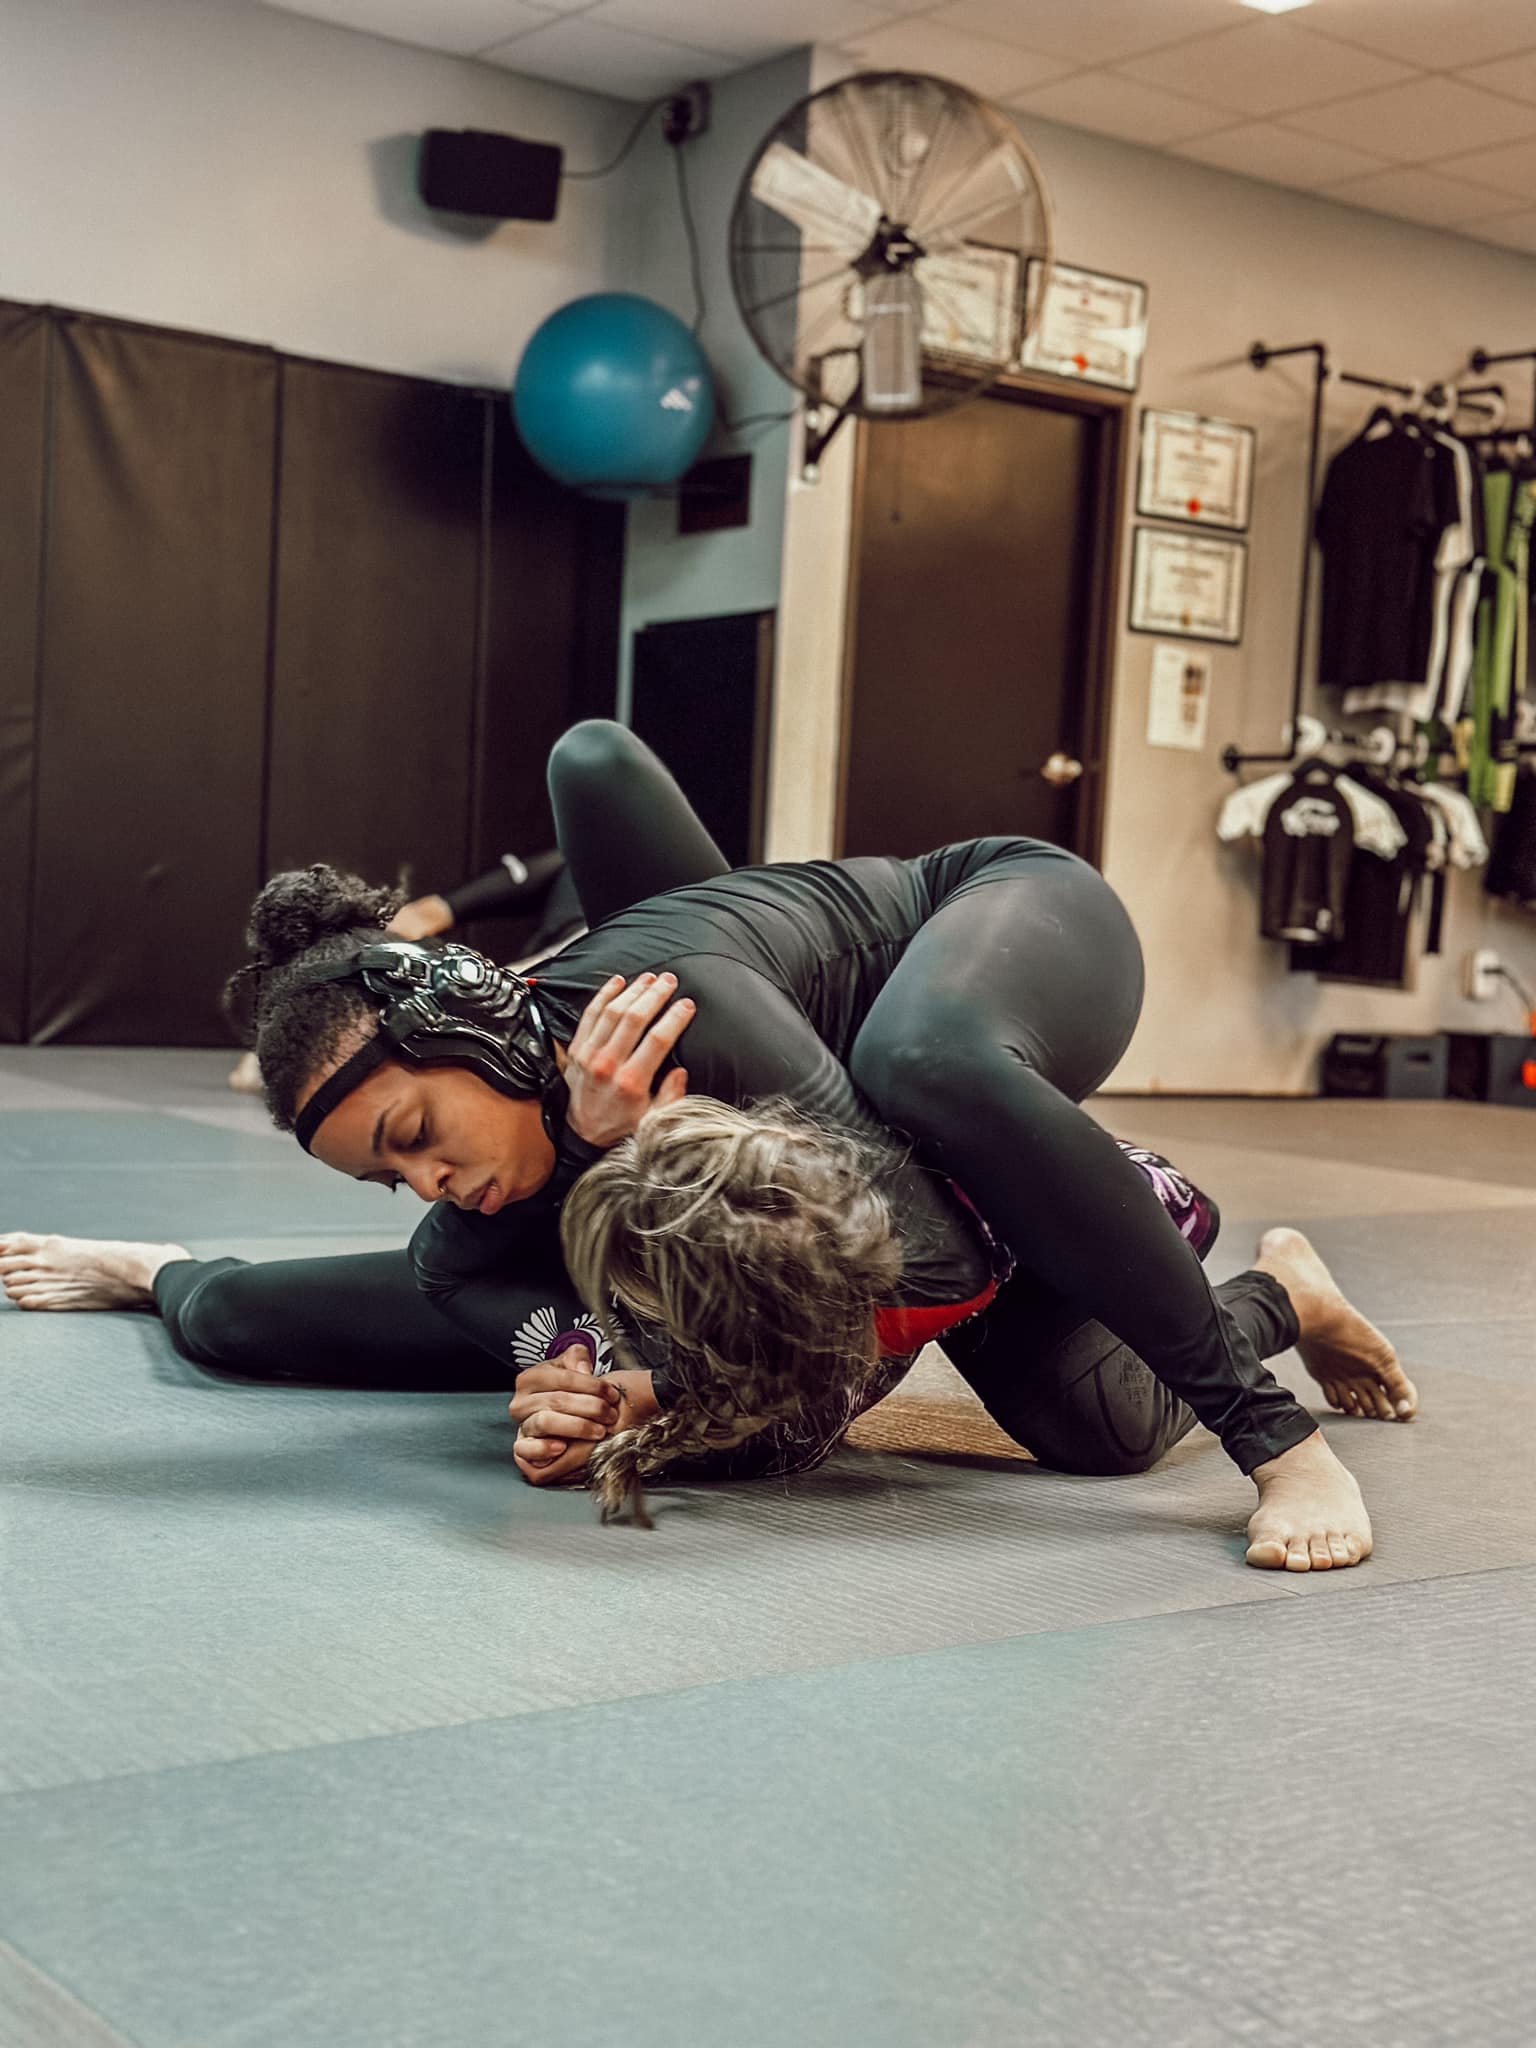 Two individuals engaged in a Brazilian Jiu-Jitsu training session on the gym floor, with one in a dominant top position.